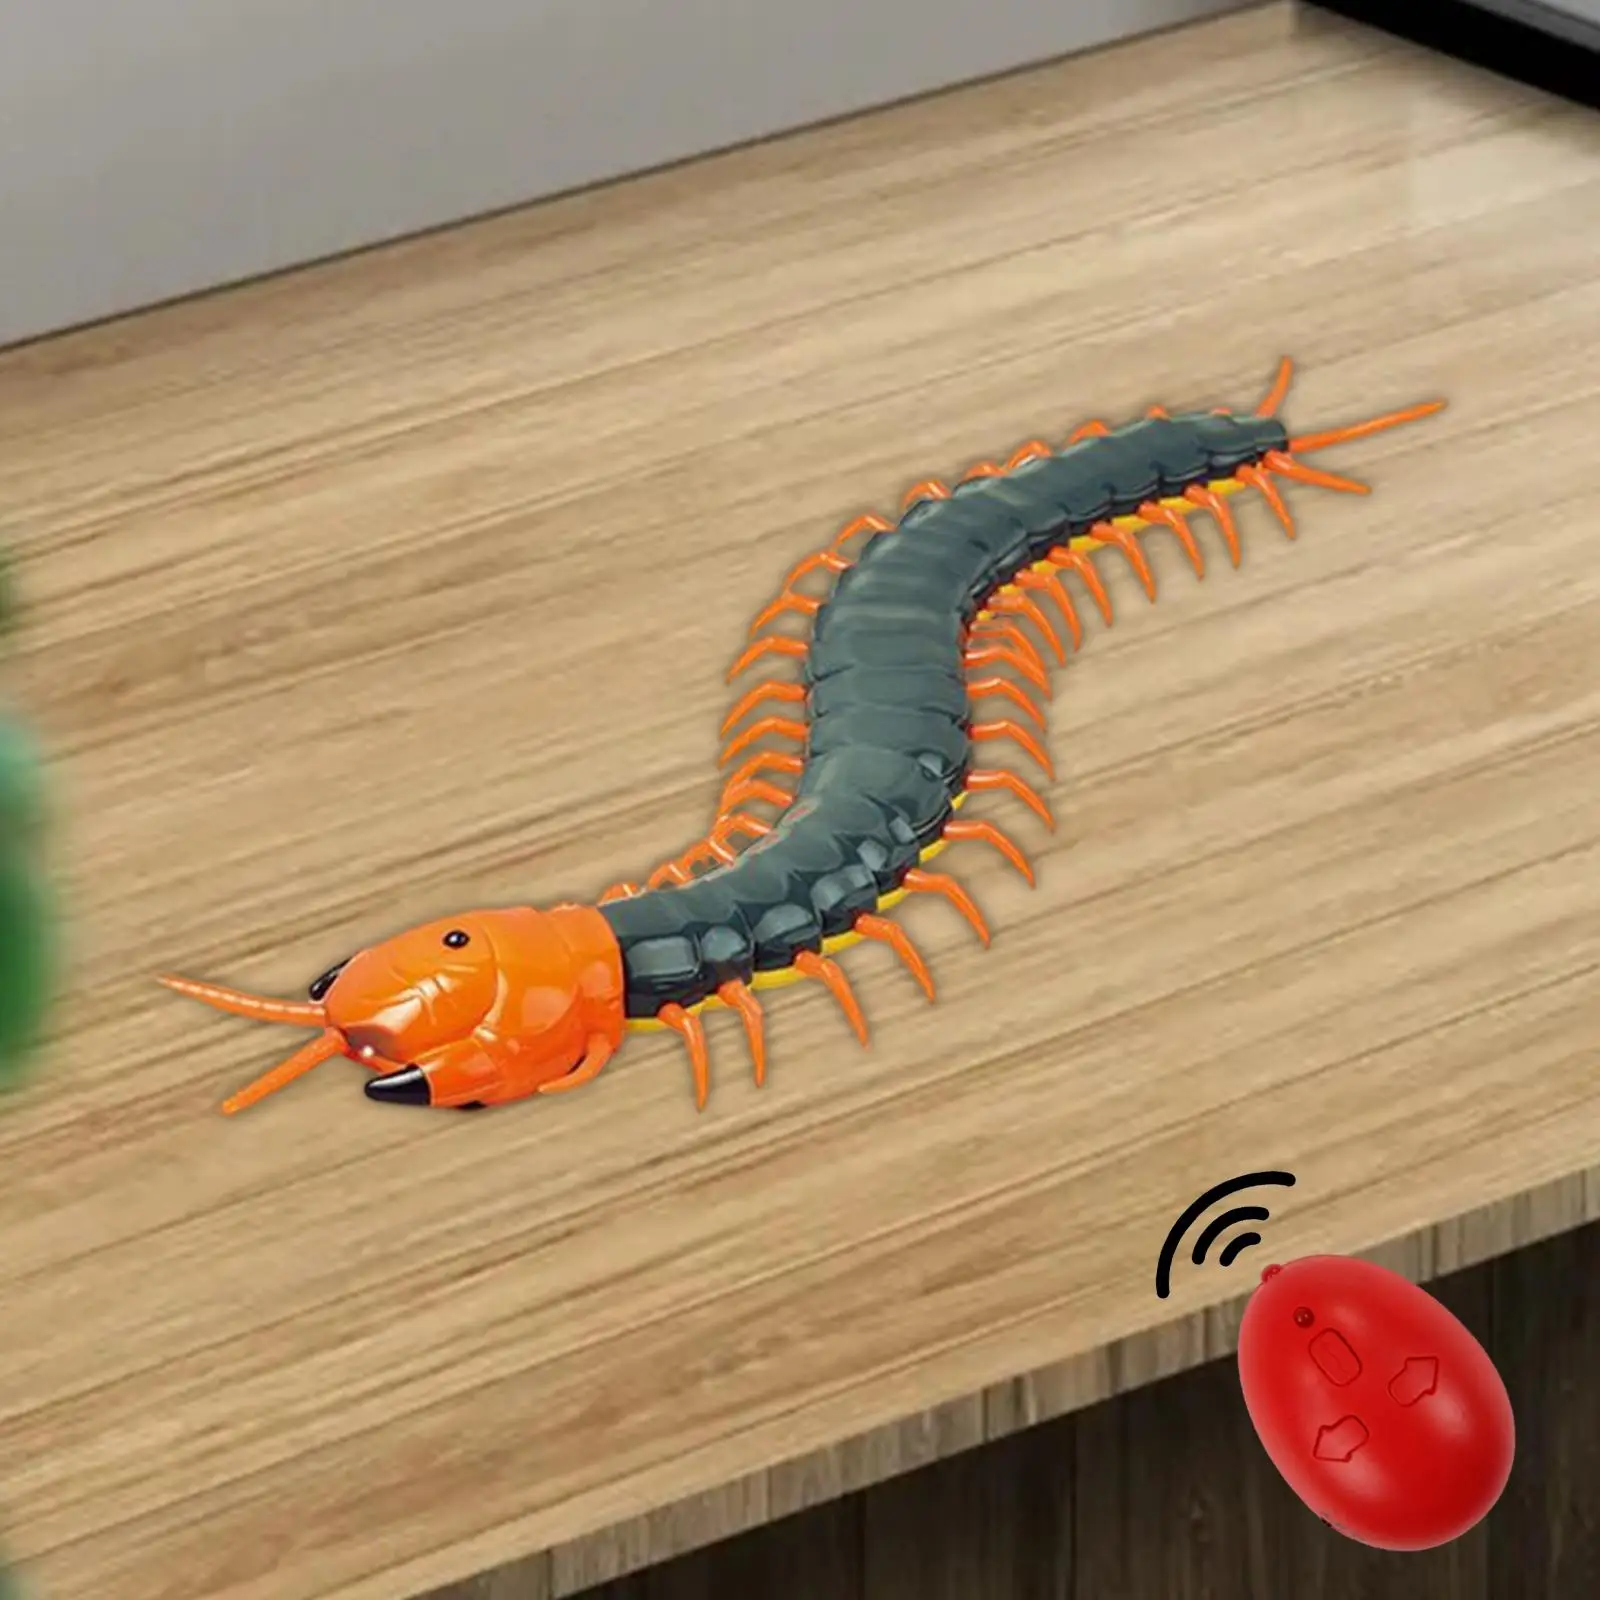 USB Remote Control Centipede Centipede Toys Halloween Jewelry Props Game Electric Centipede Toy